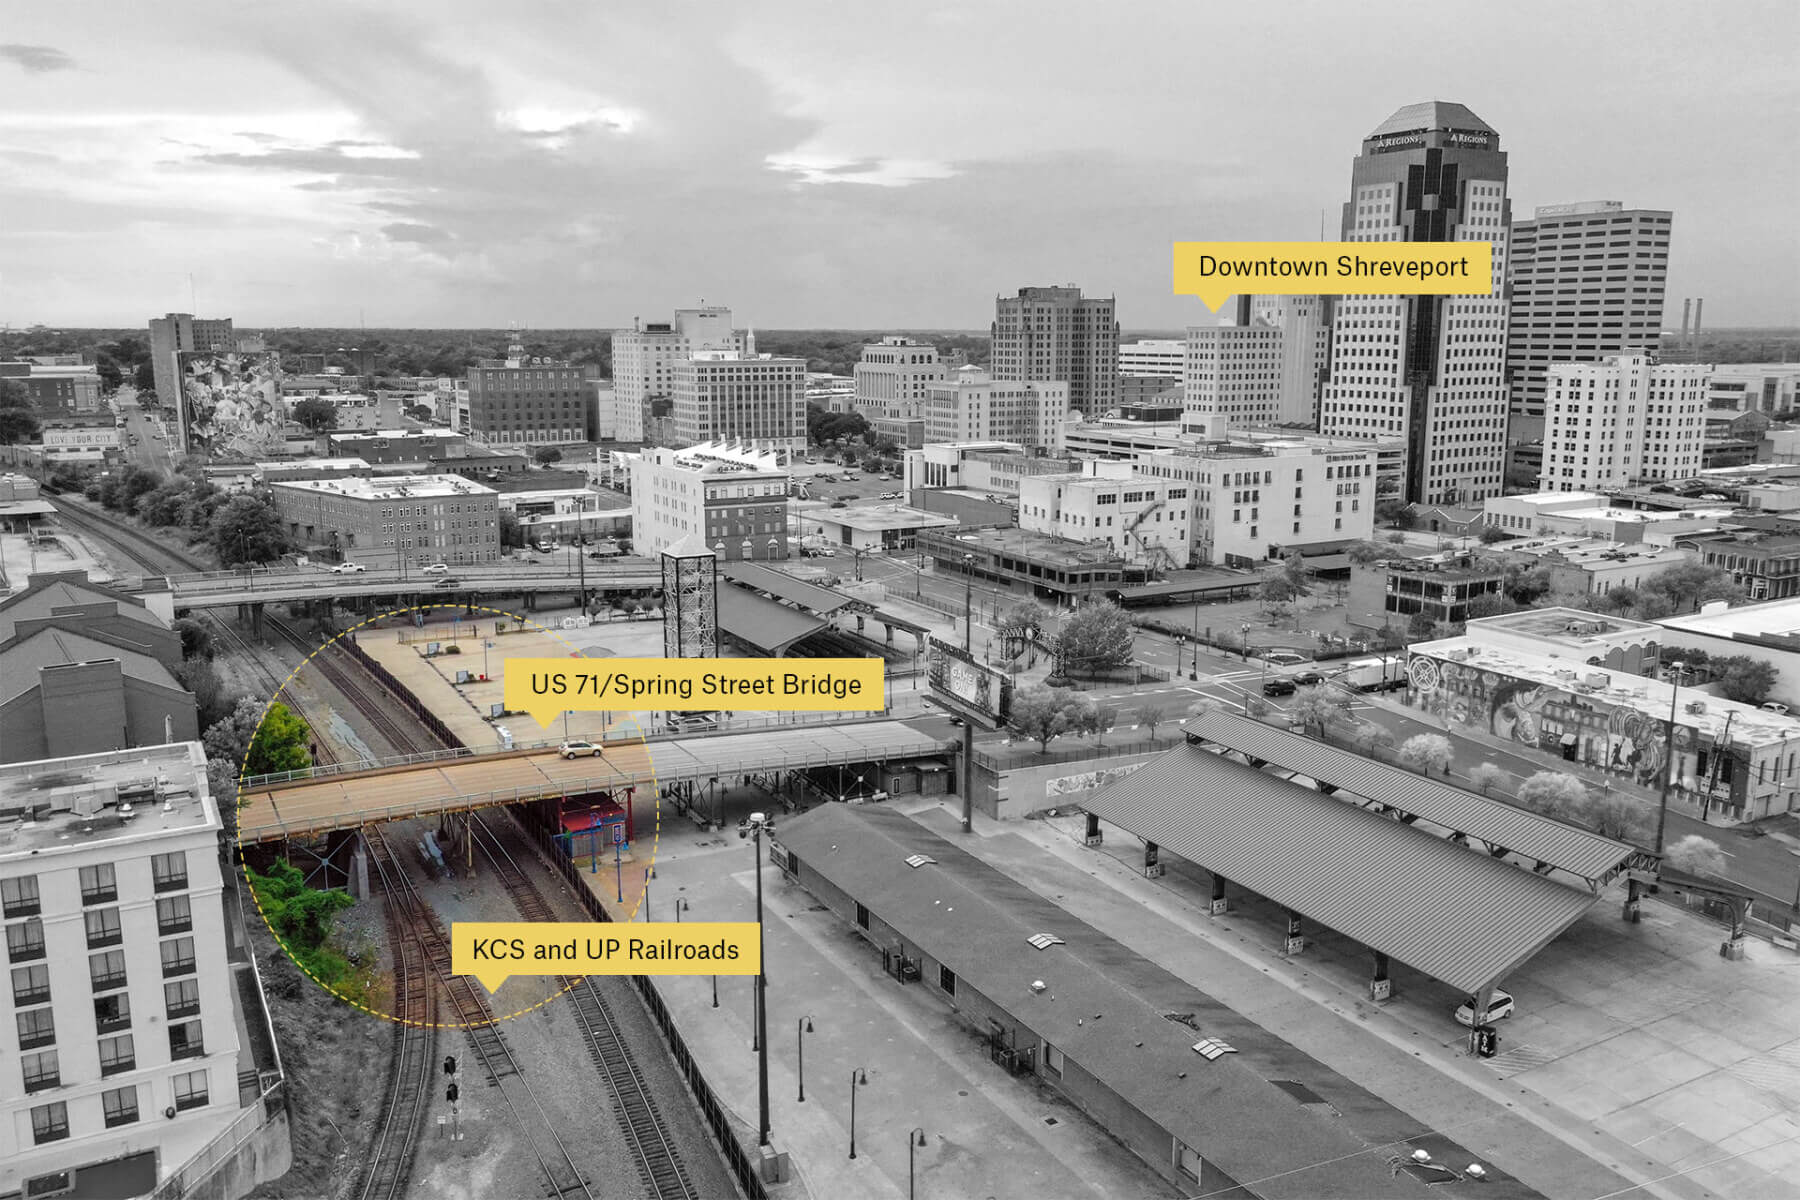 an shot of Shreveport, LA and the Spring Street Bridge highlighted in yellow